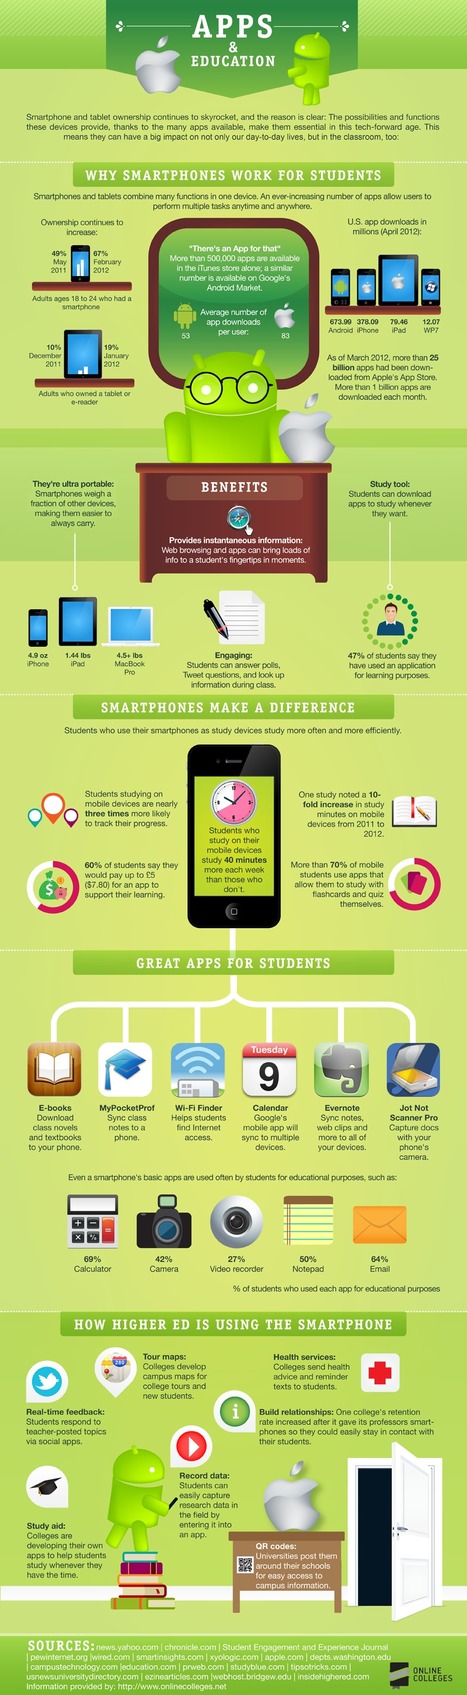 Smartphones, Apps, Students And Study | Mobile Technology | Scoop.it